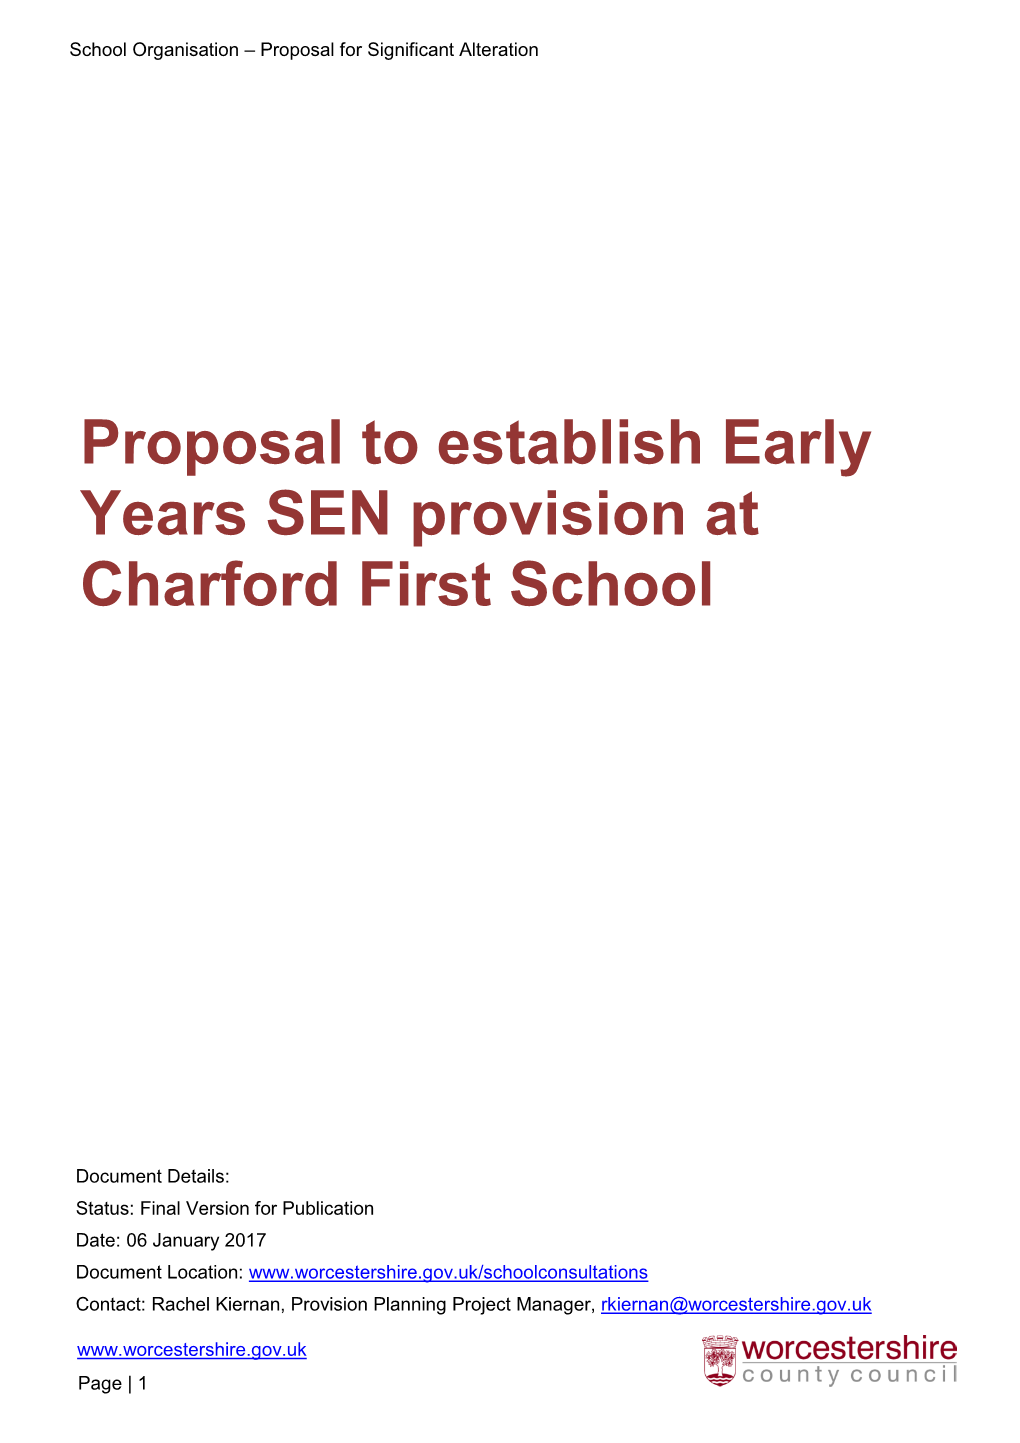 Proposal to Establish Early Years SEN Provision at Charford First School